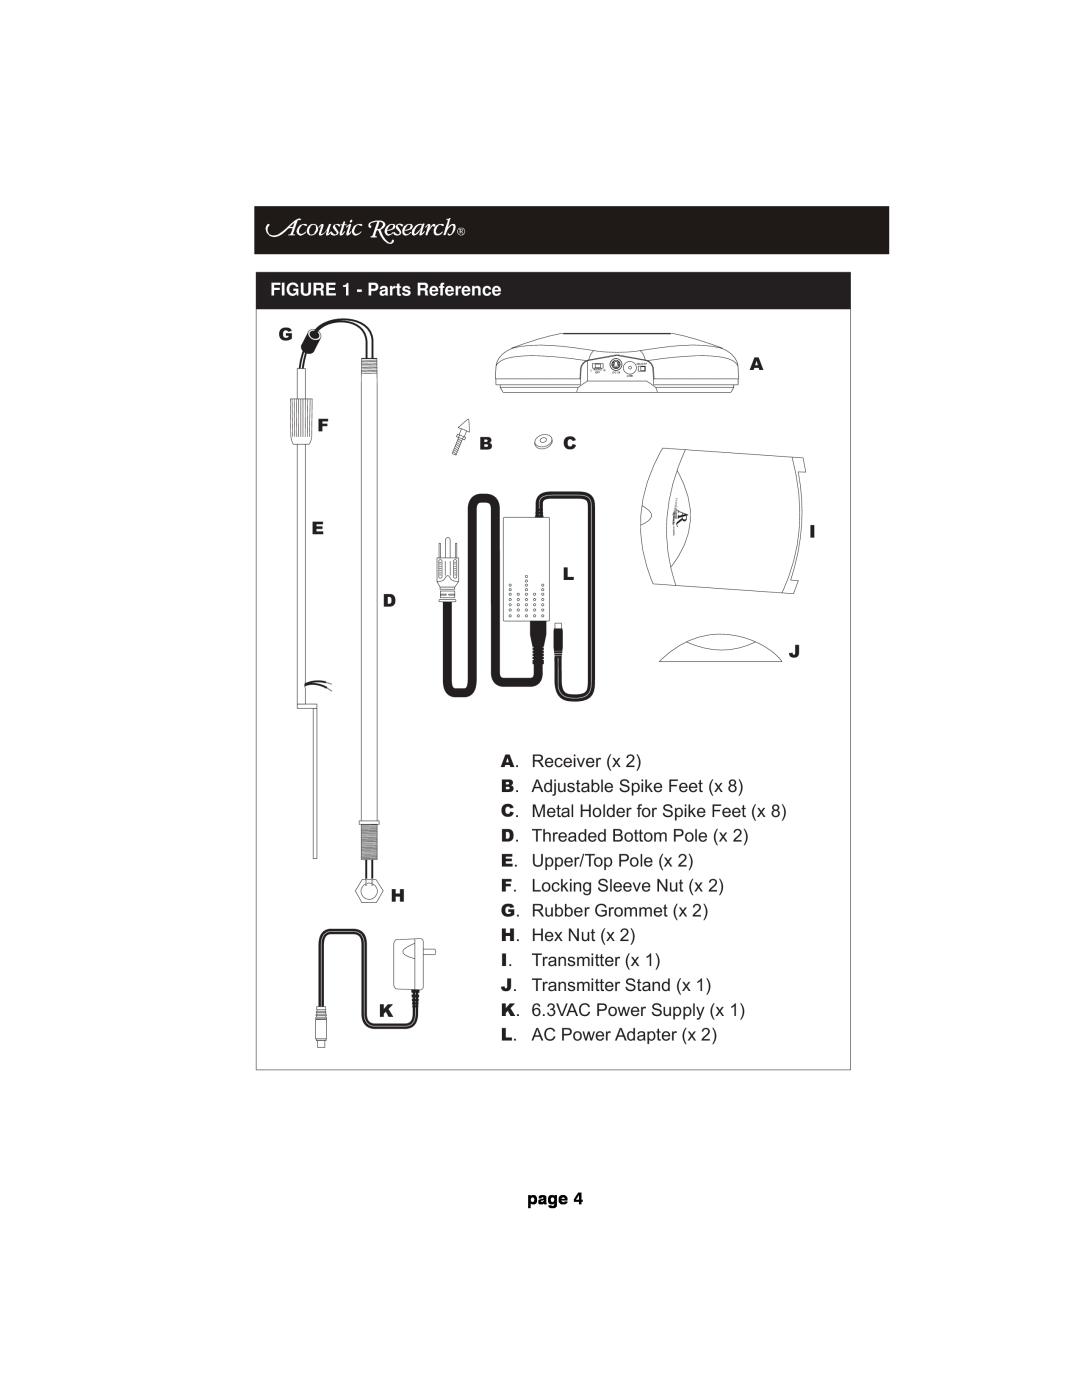 Acoustic Research HT60 operation manual Parts Reference, page 